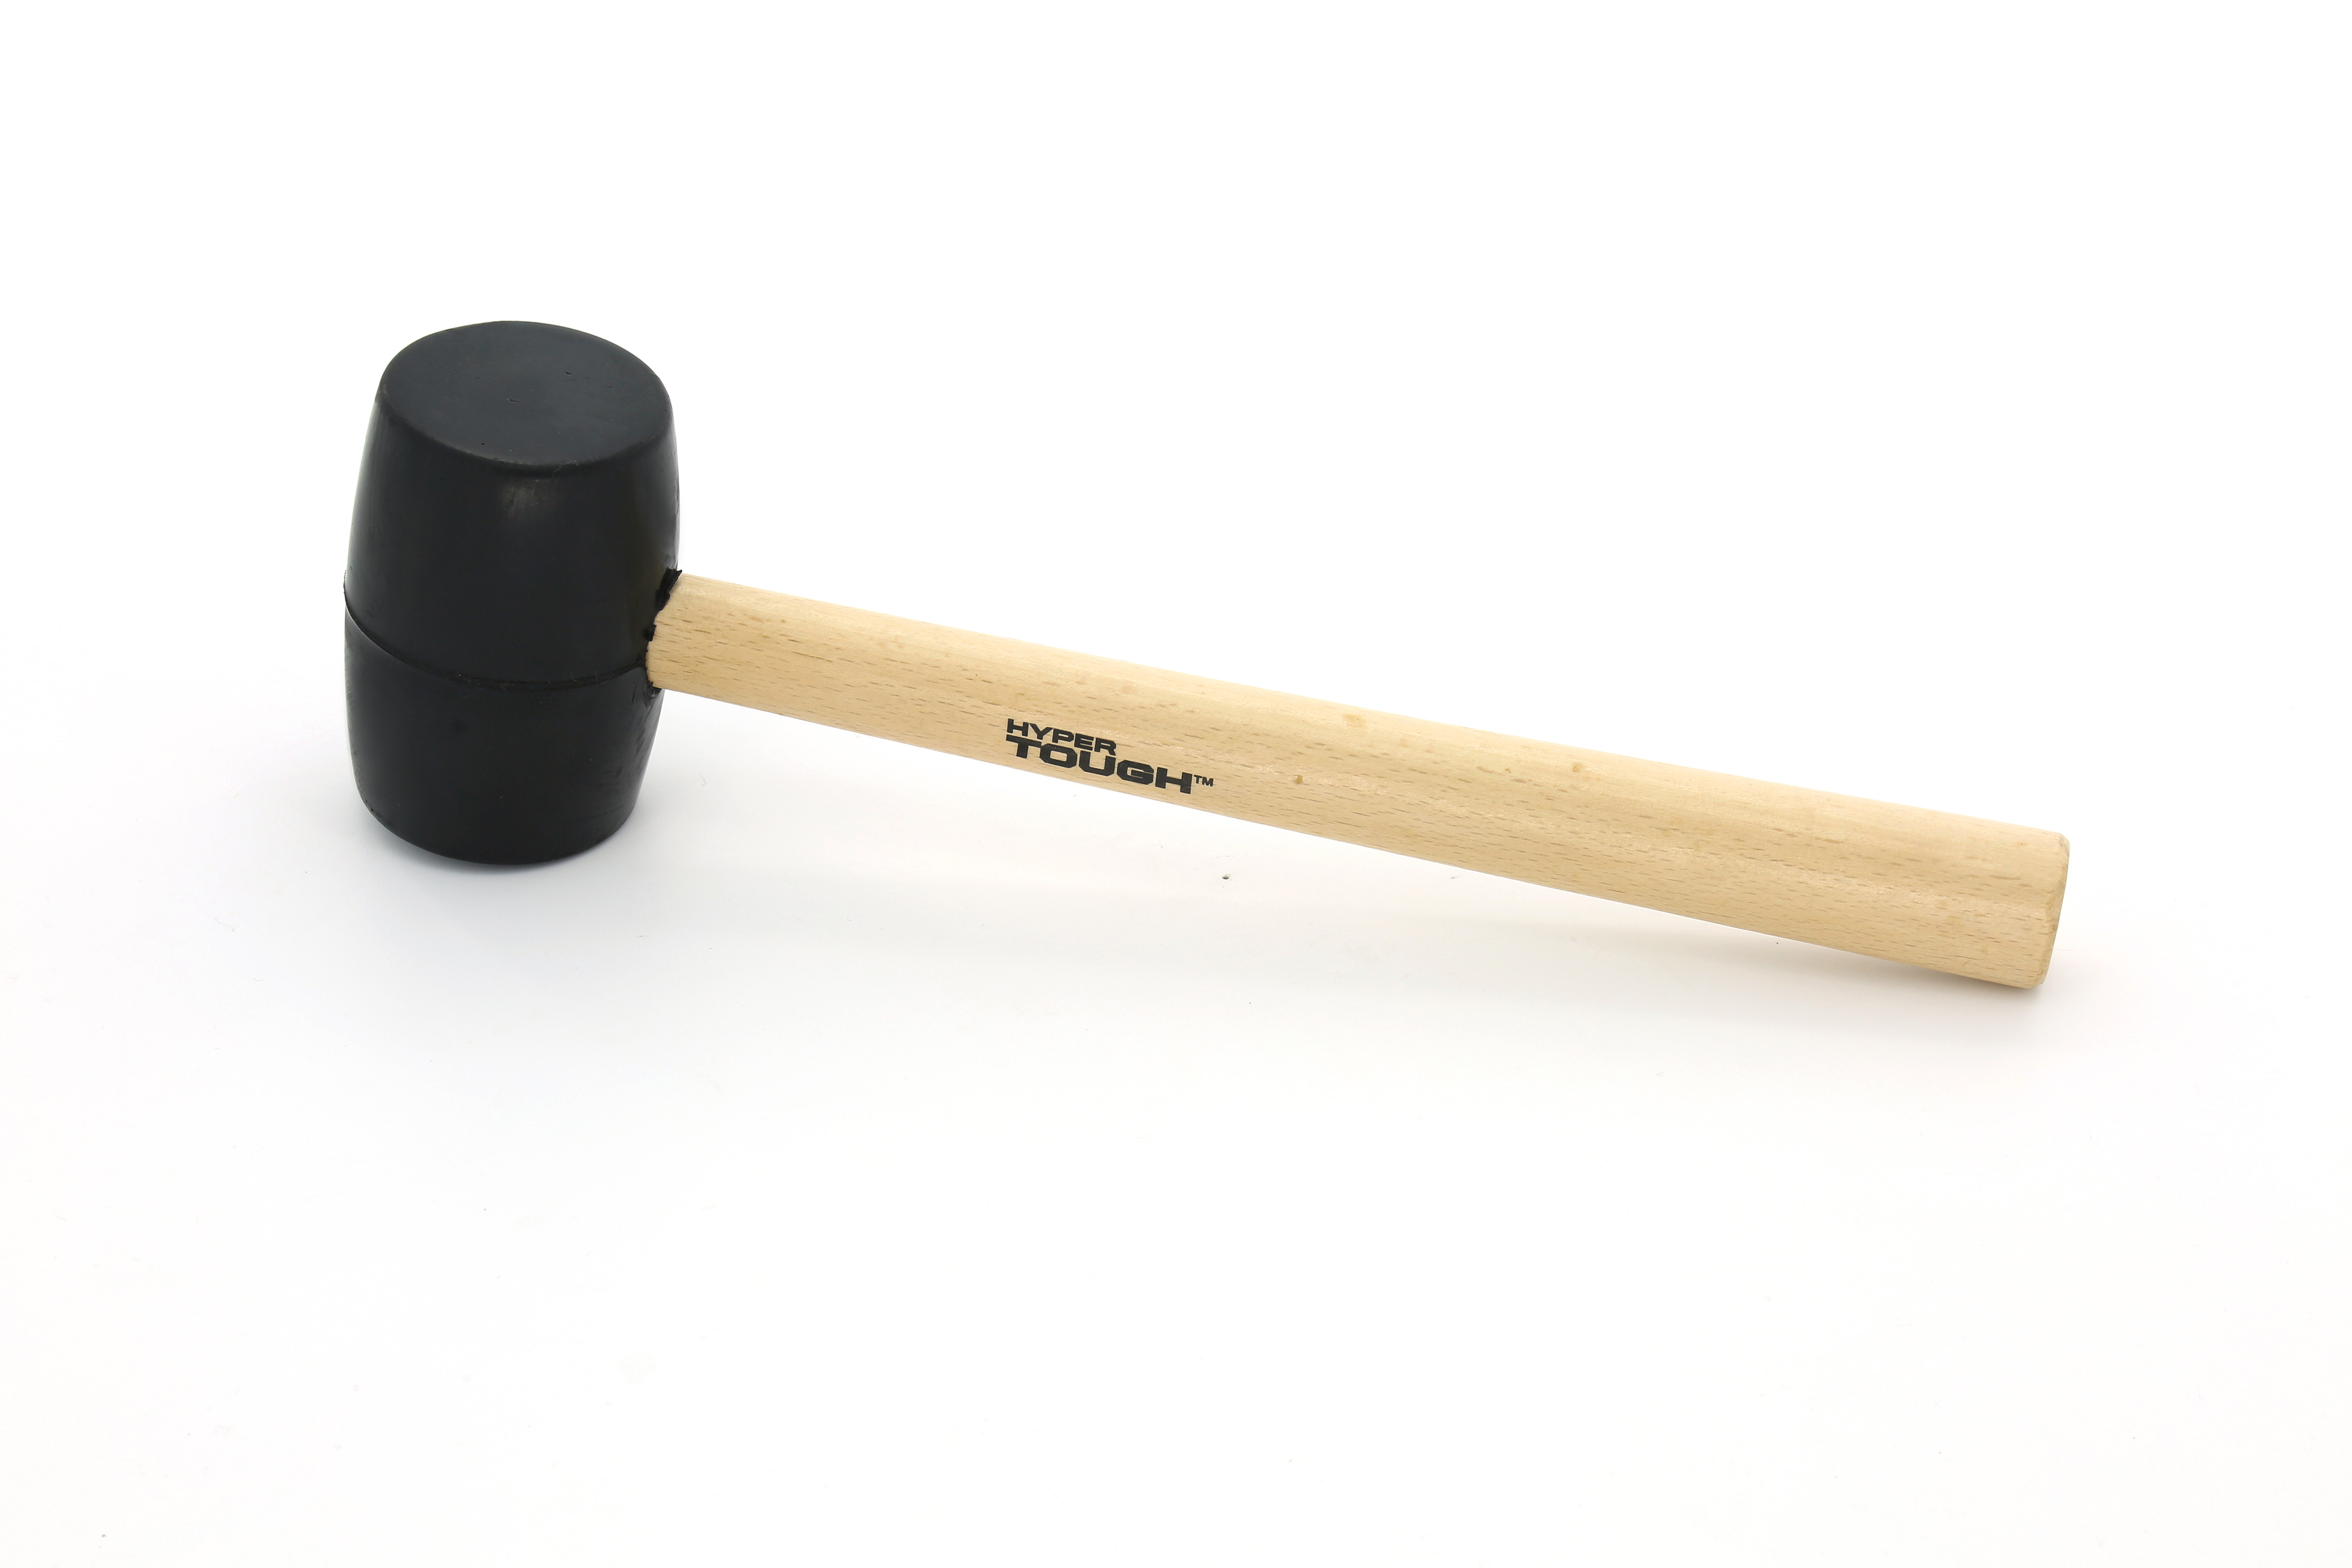 Rubber Mallet: Wood Handle, 16 oz Head Wt, 2 1/2 in Dia, 3 7/8 in Head Lg,  14 in Overall Lg, Black